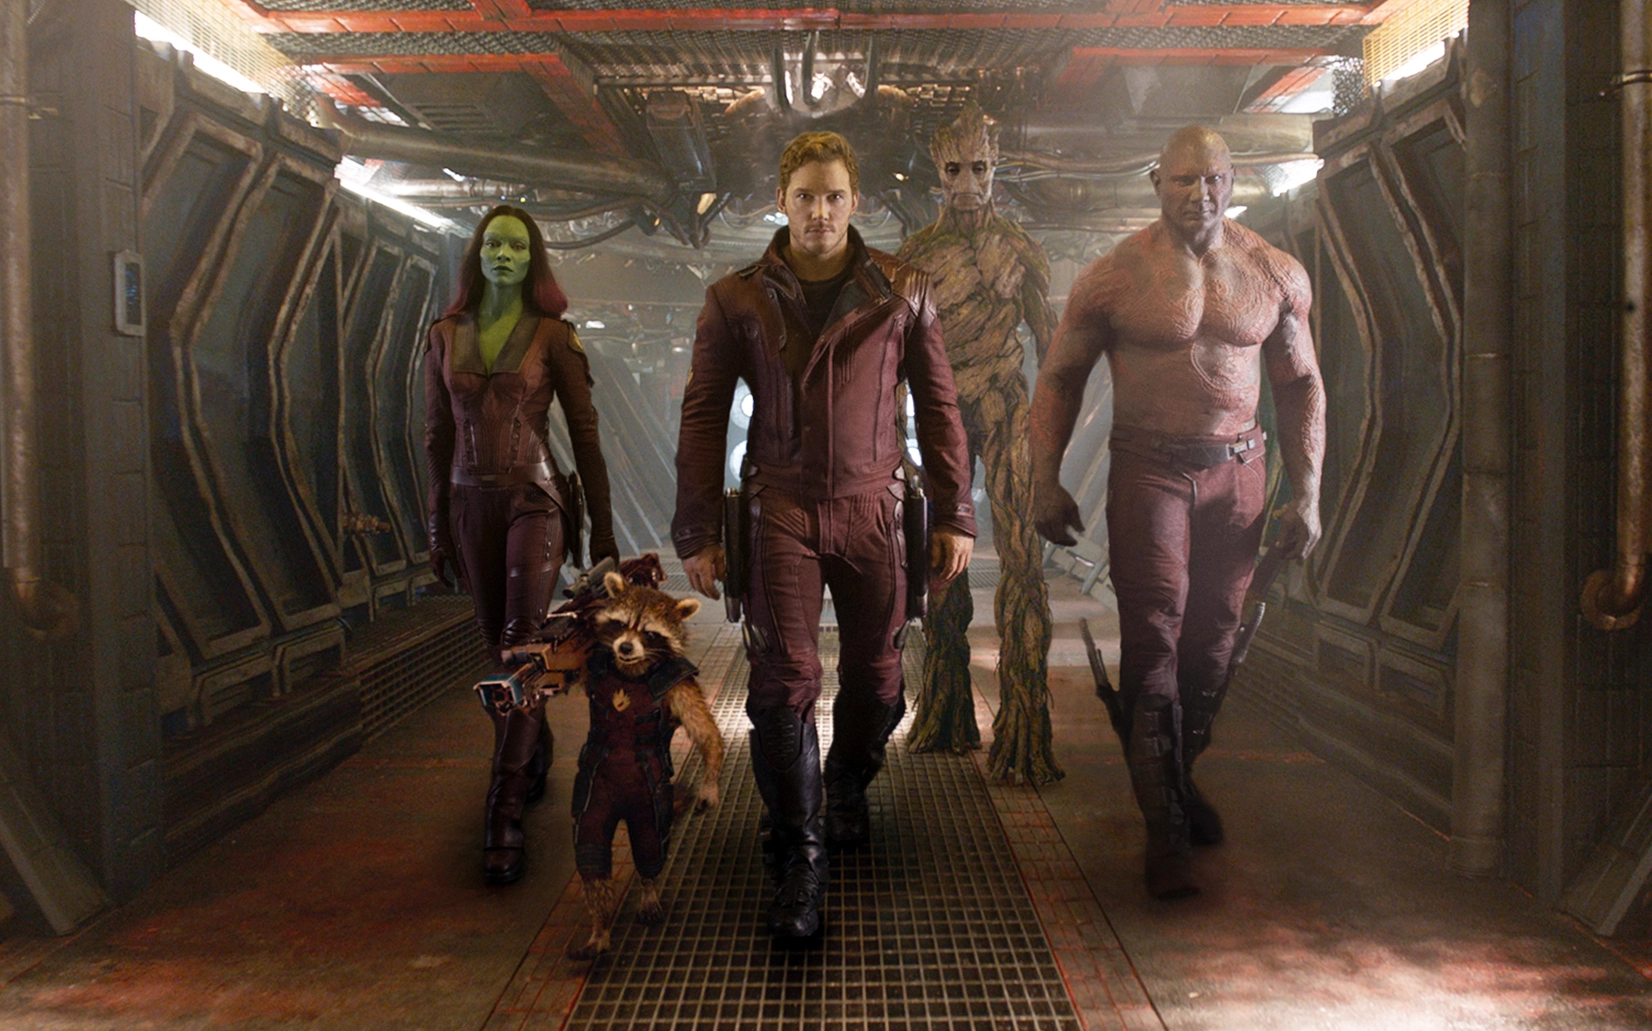 Secret Cinema’s Marvel team-up works well on Guardians of the Galaxy